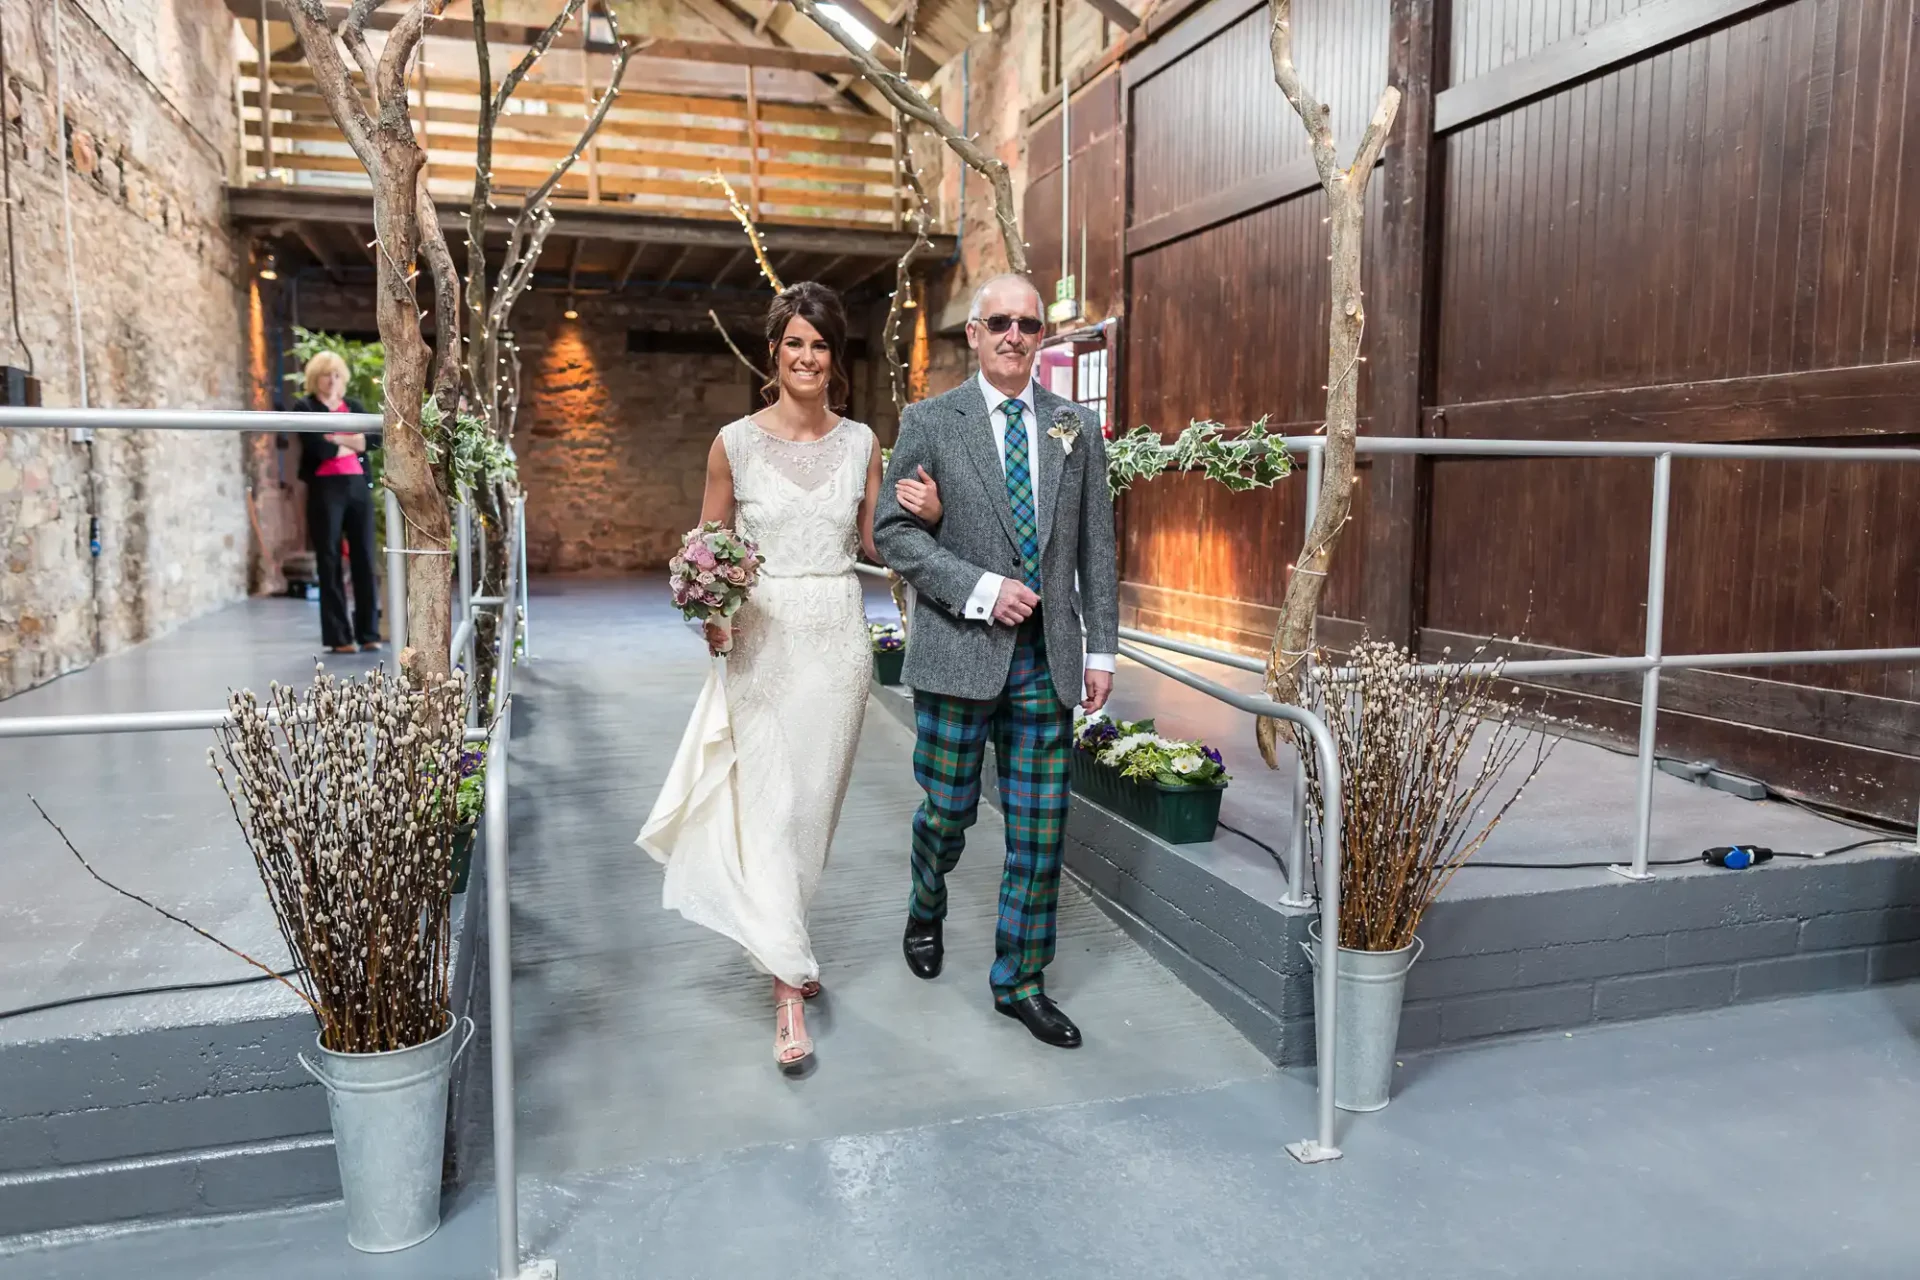 A bride and her father walking down the aisle in a rustic indoor setting, the father wearing a tartan kilt and the bride in a white lace dress.